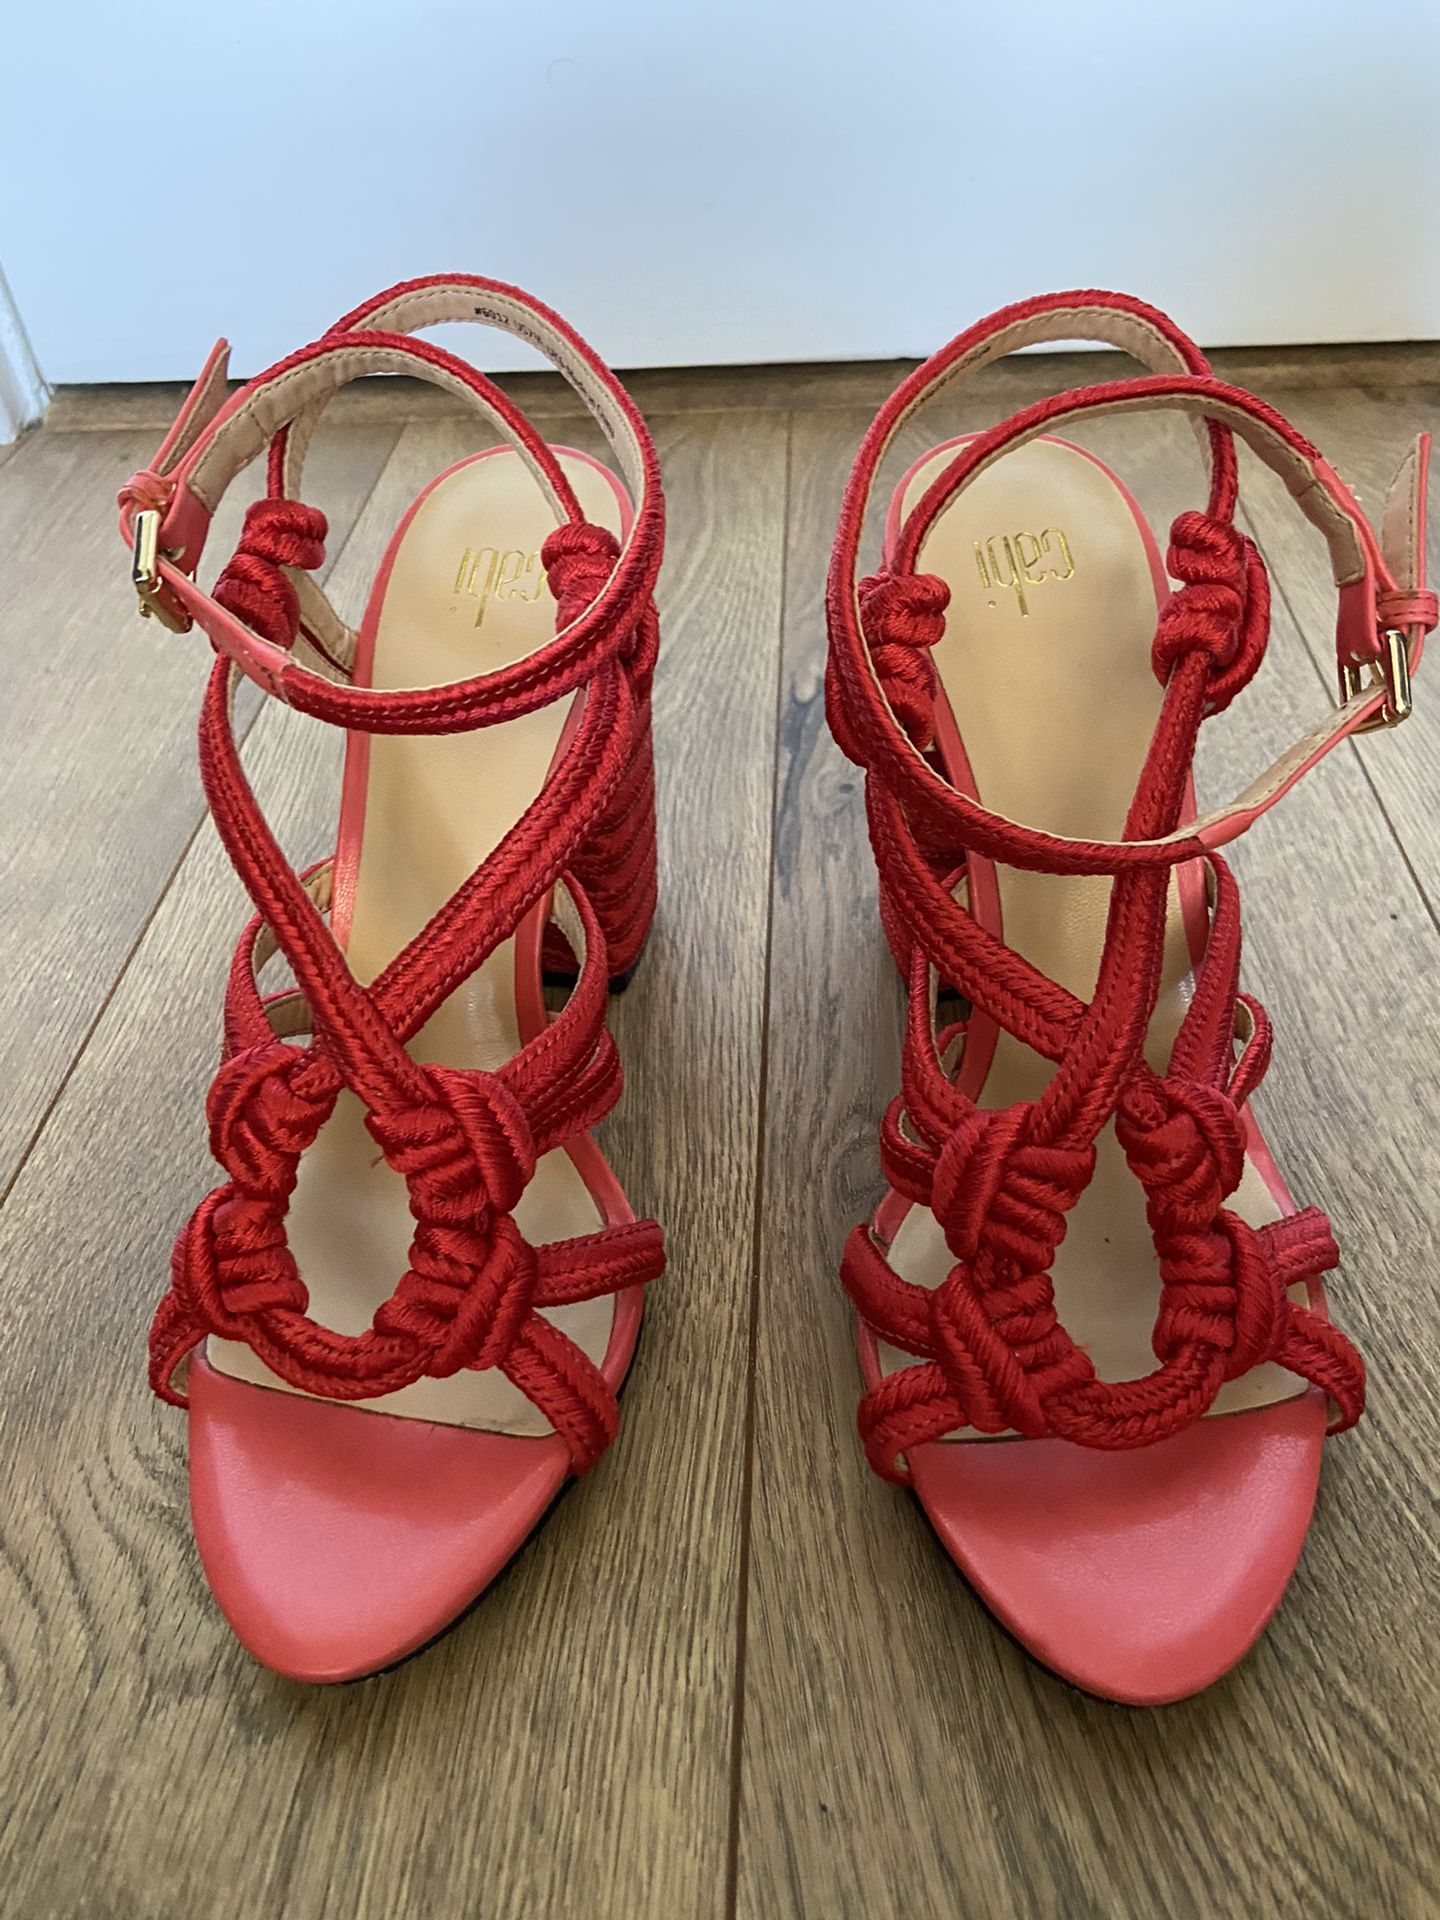 Cabi red chunky strappy heels with rope detail sz 7.5